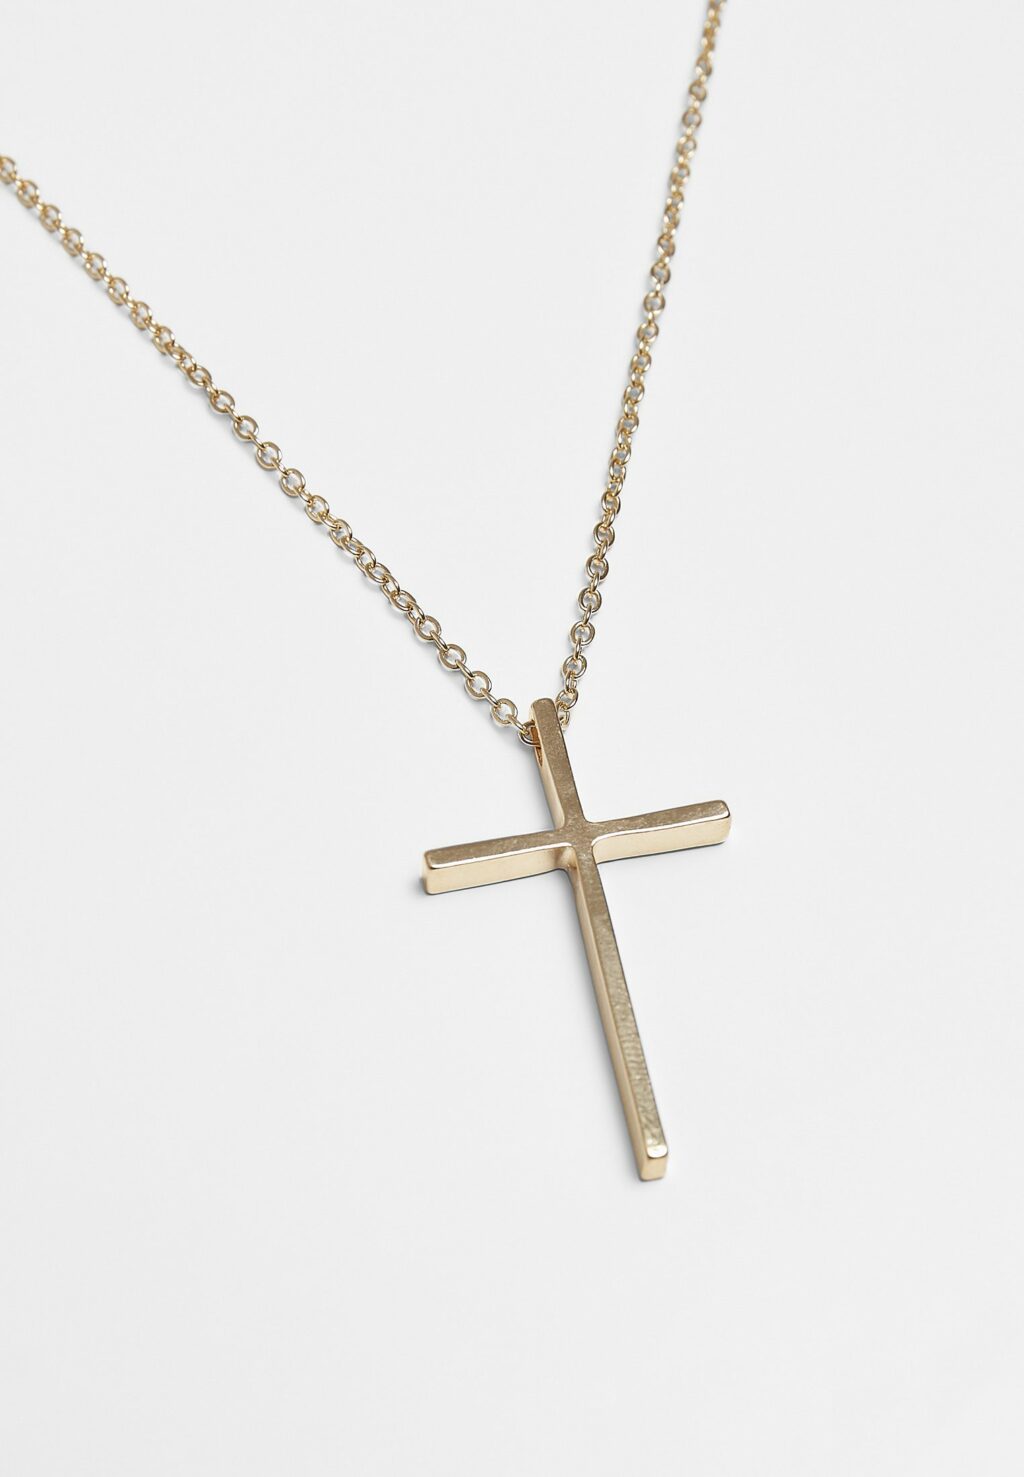 Big Basic Cross Necklace gold one TB4057